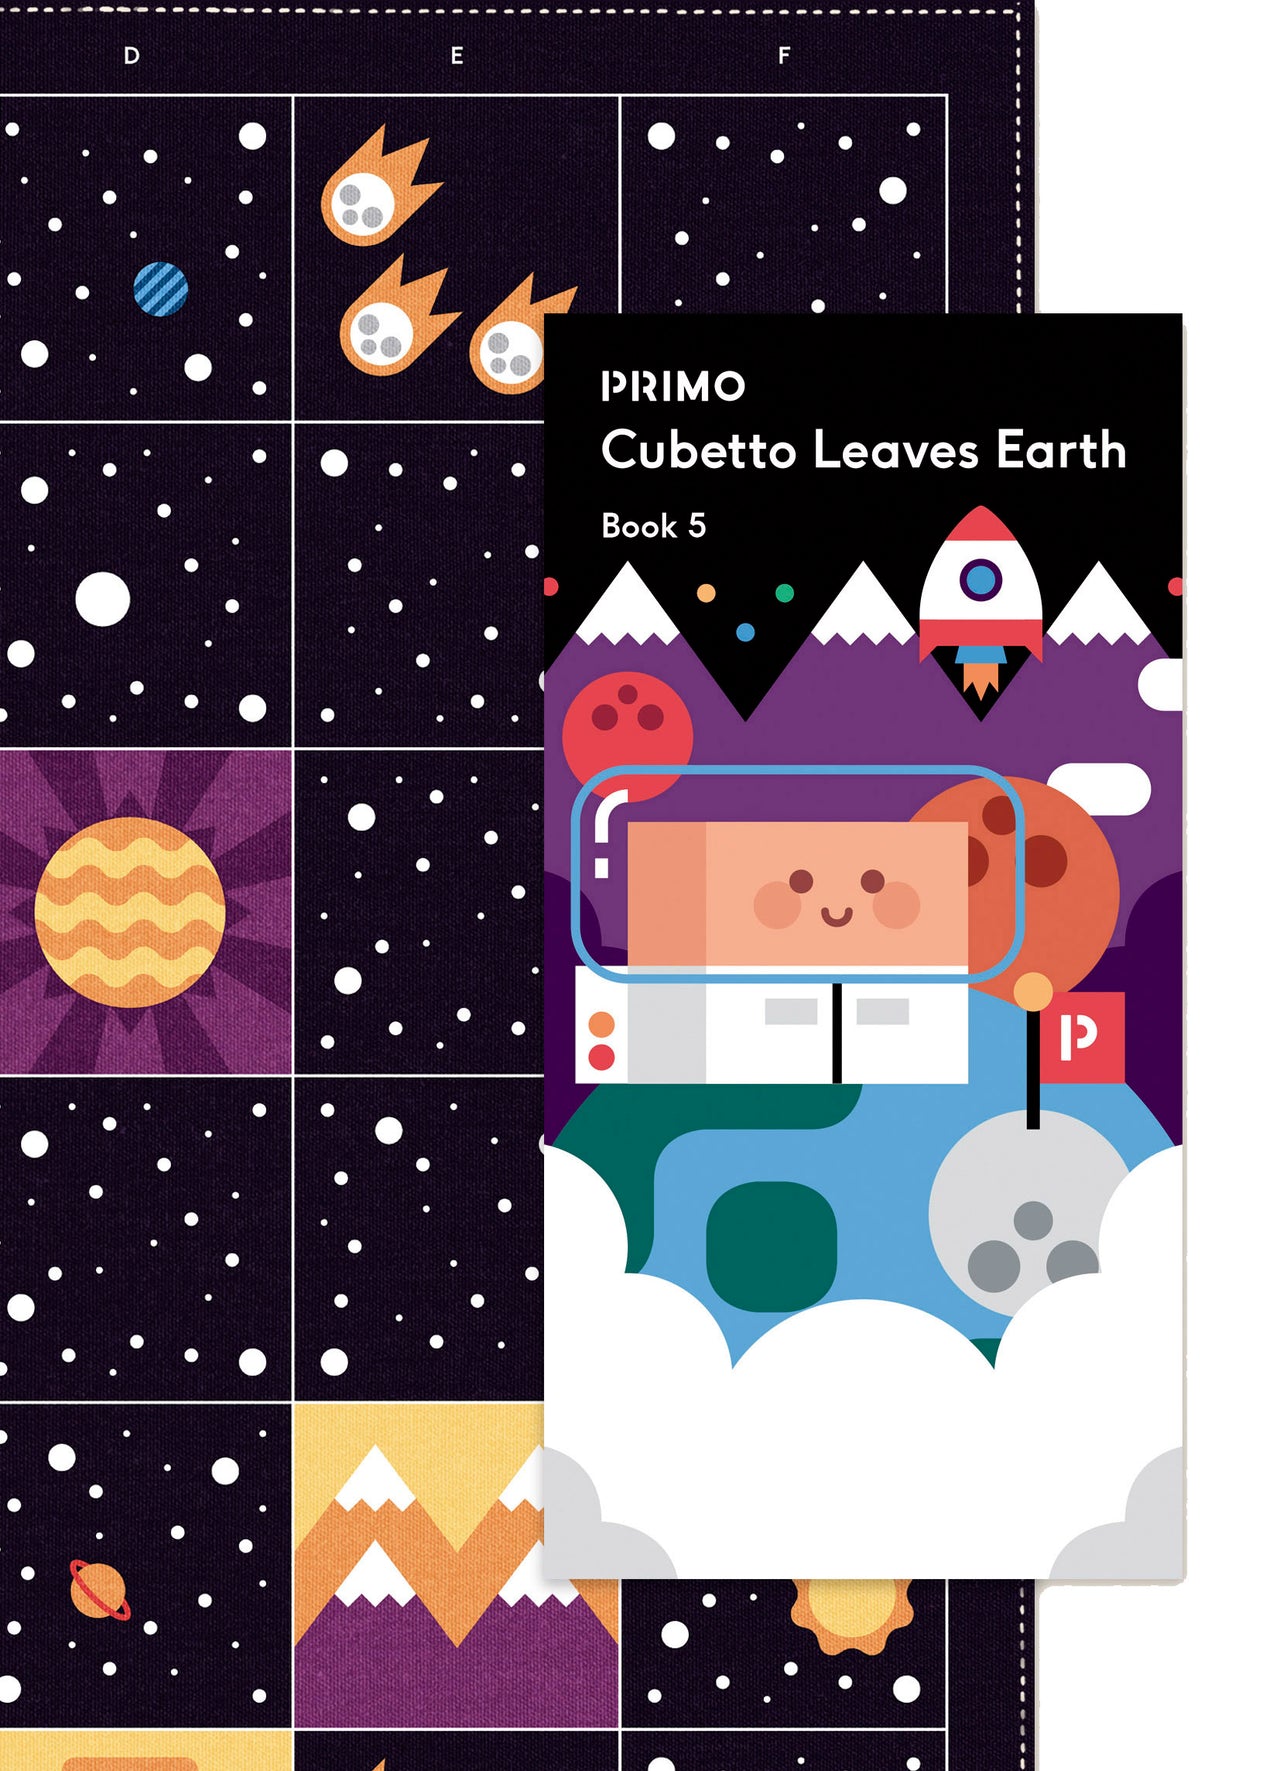 cubetto leaves earth - space map and story book